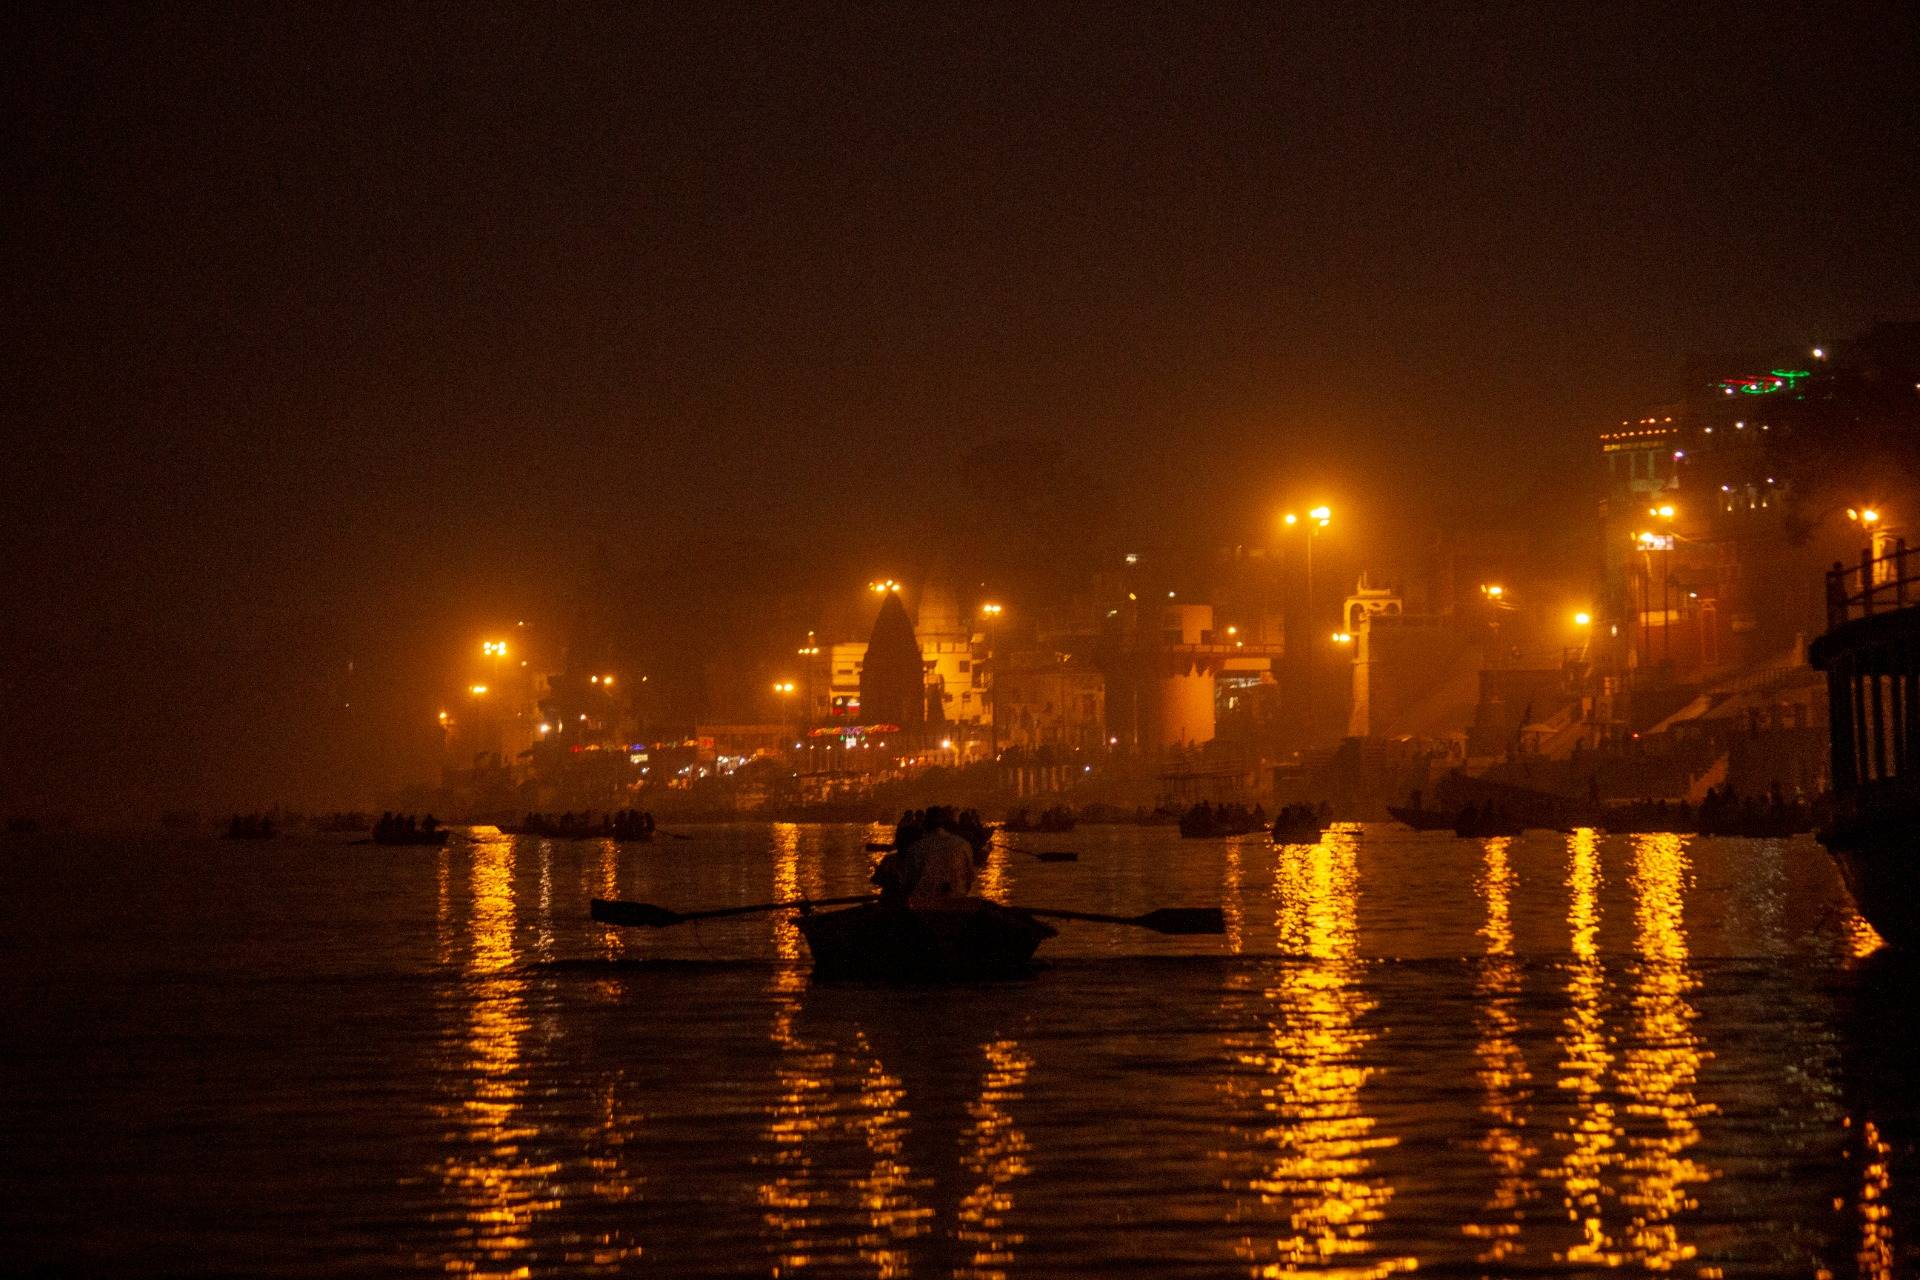 Tourist boats row towards the burning Ghats in the light of flames.